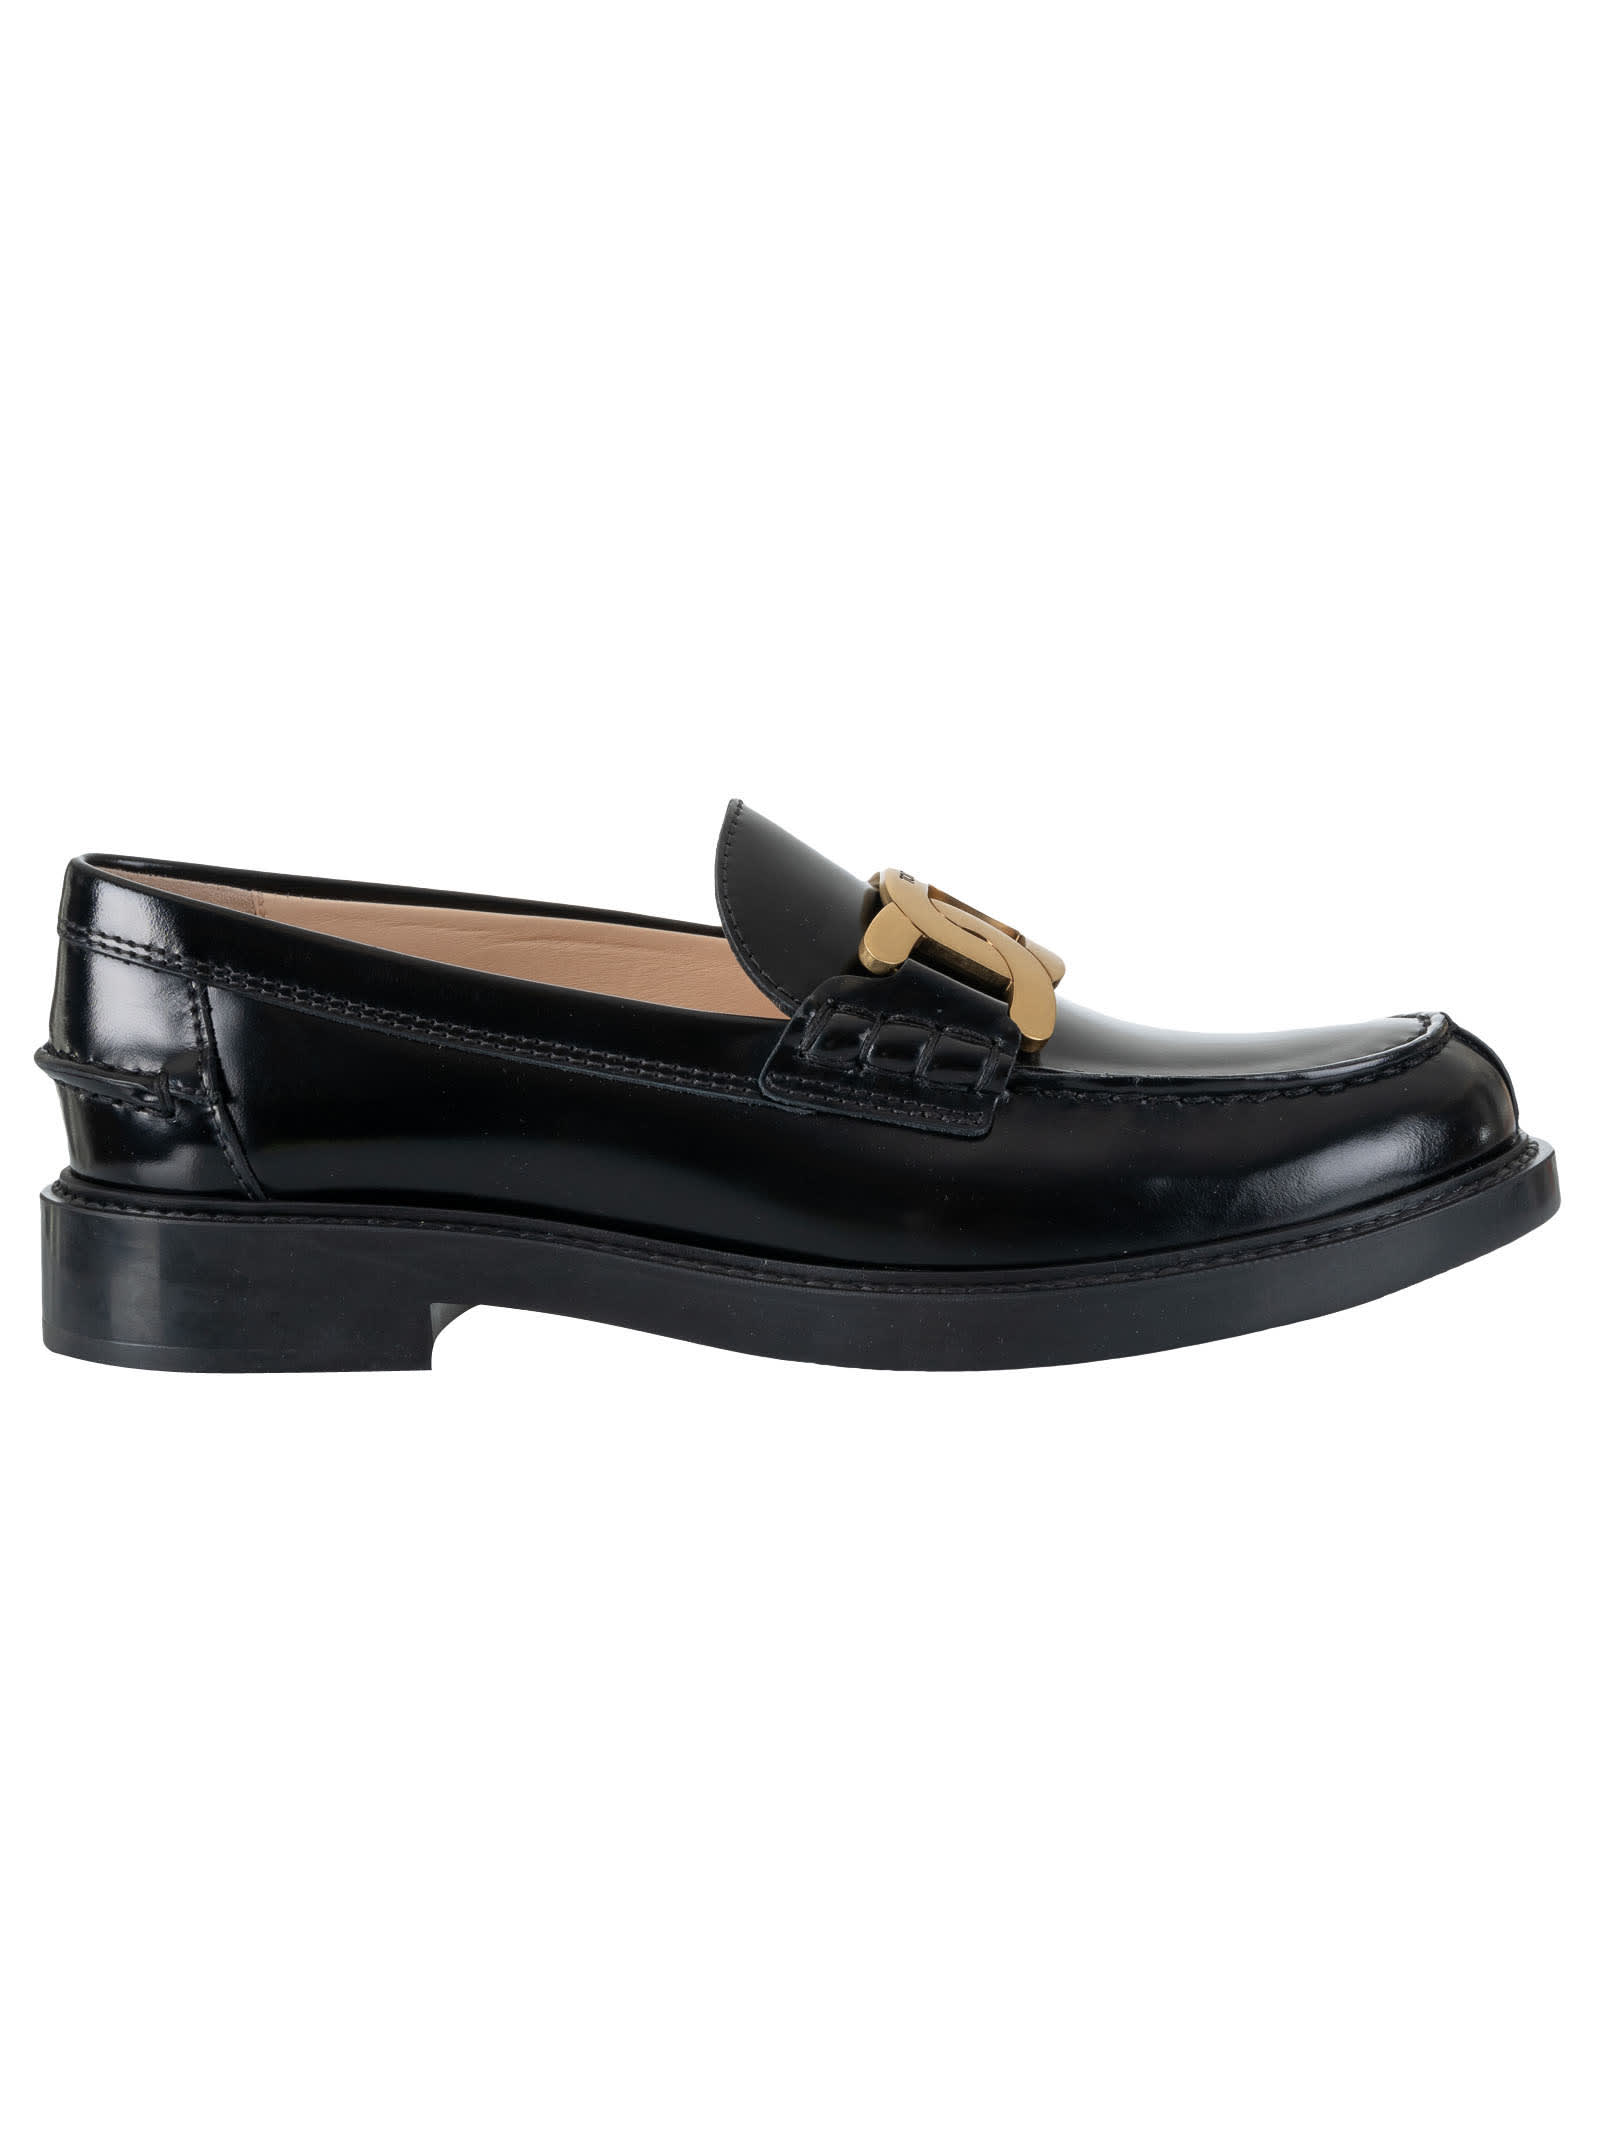 Tods Catena Loafers